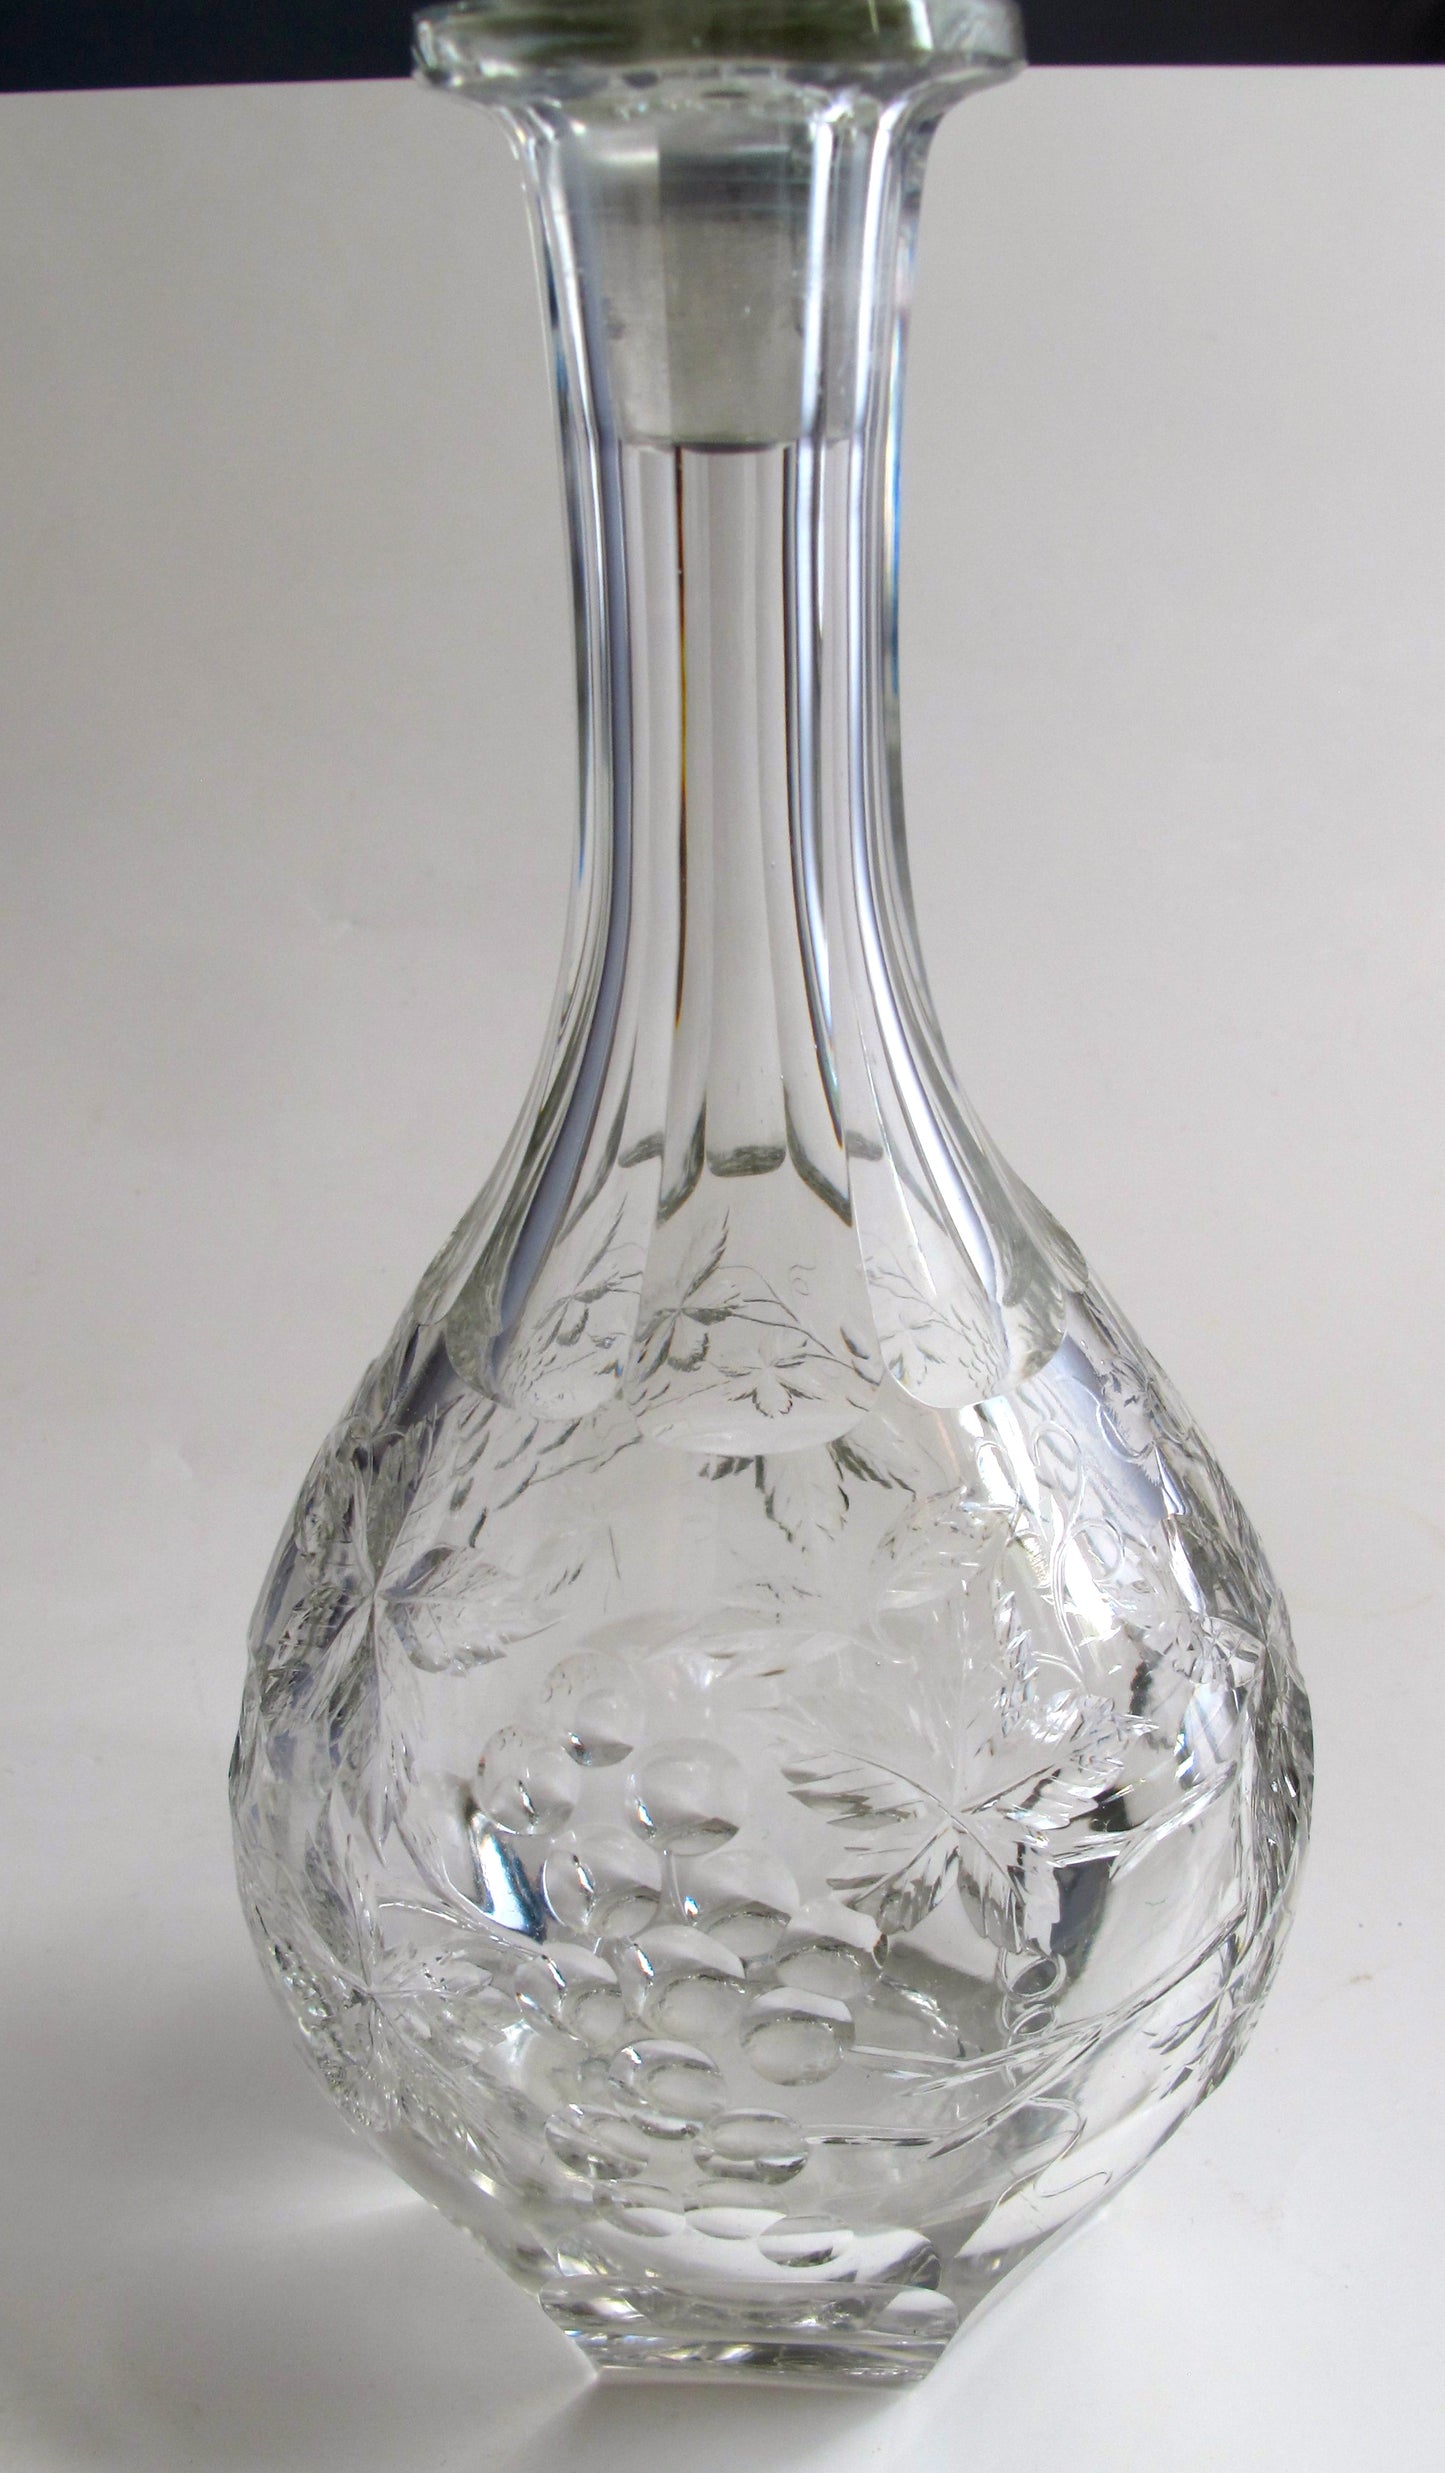 American Brilliant Period Cut Glass decanter grapes,  Antique  ABP - O'Rourke crystal awards & gifts abp cut glass